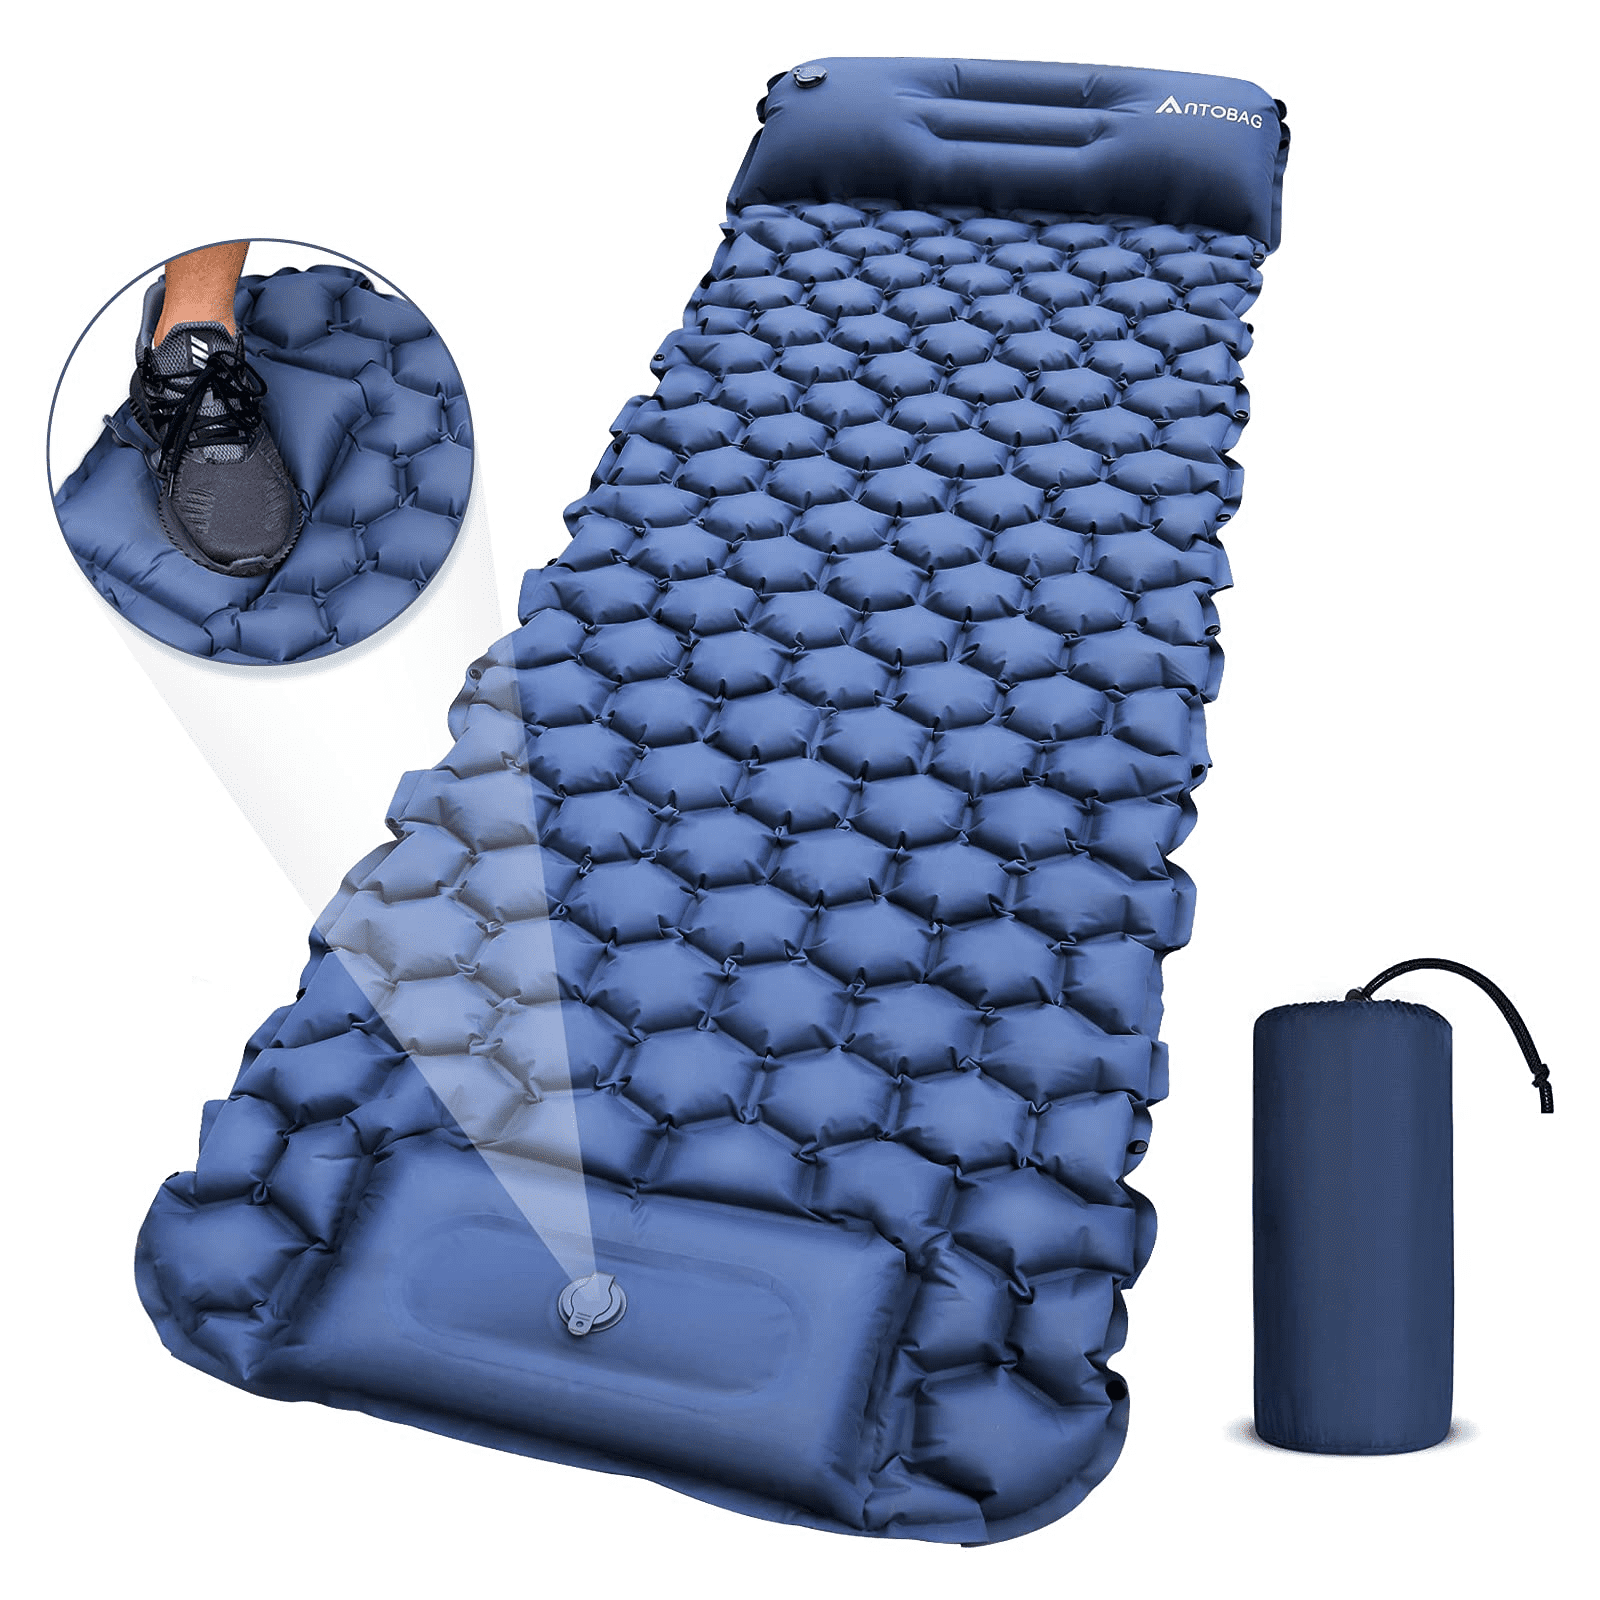 CAN_Deal Microfibre Soft Sleeping Bag Liner Lightweight Portable Travel Sheet for Camp Outdoor Hostel Planes Train Travel